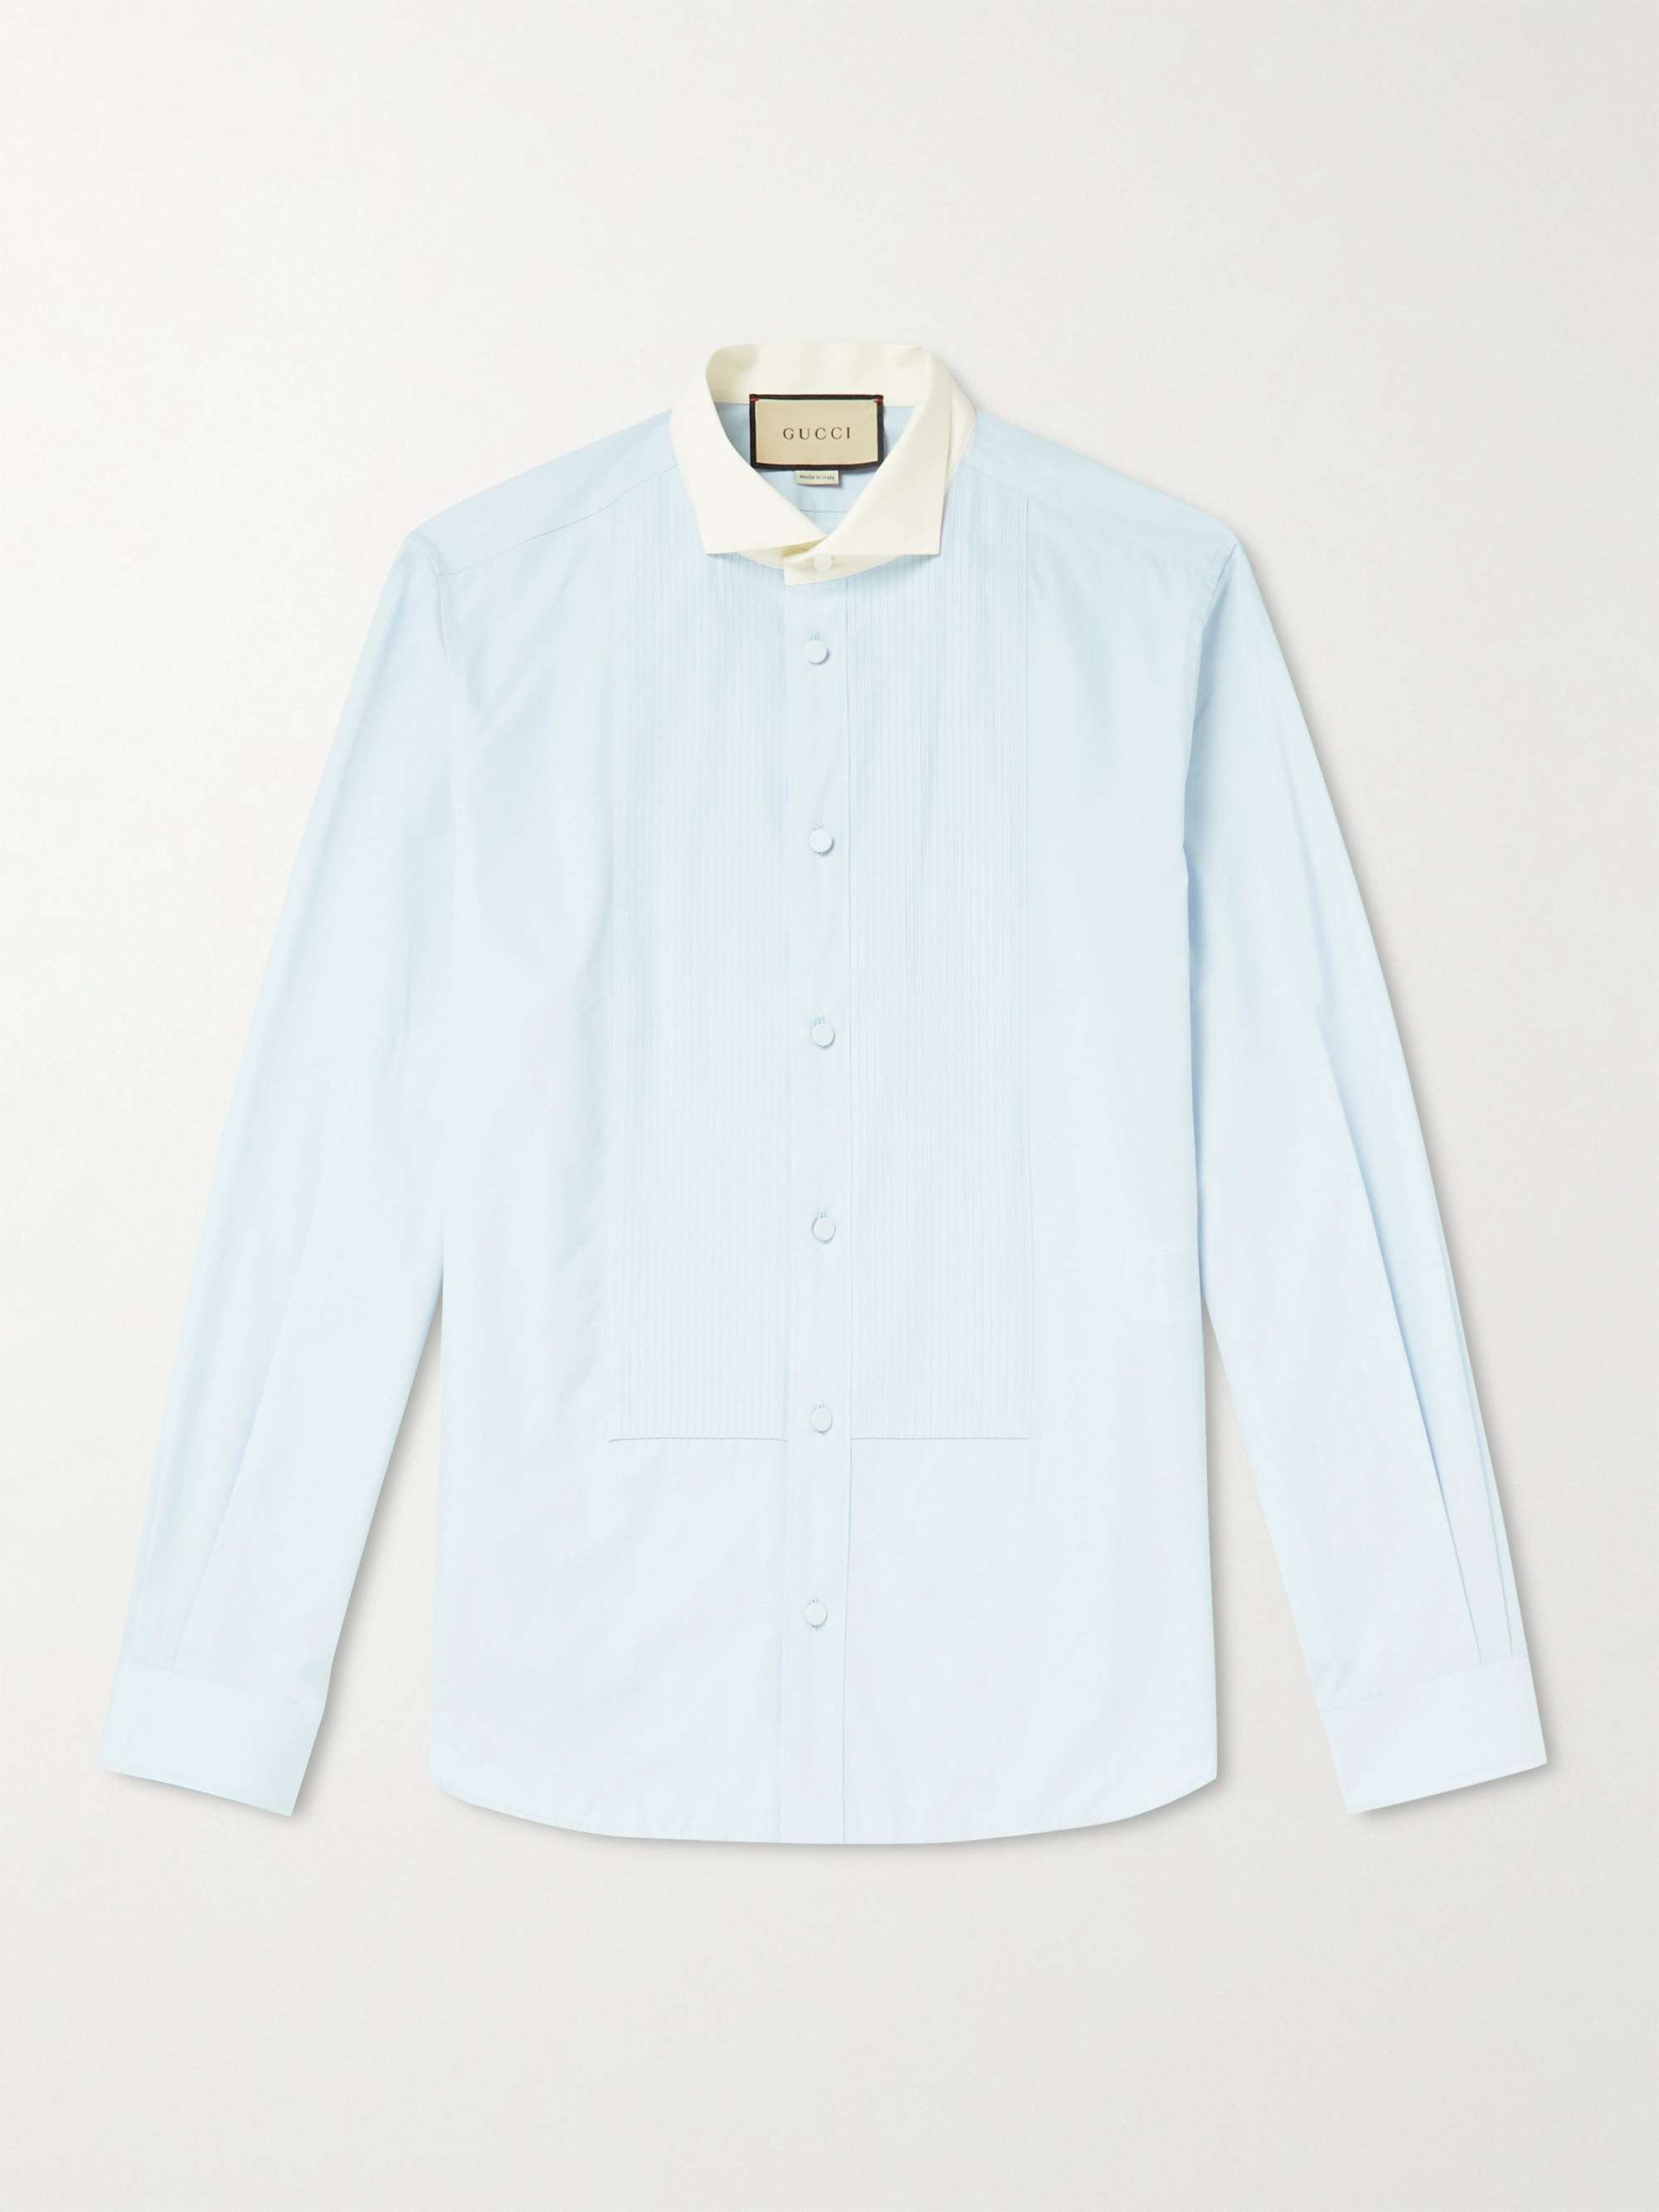 Gucci Collared Dress Shirts for Men